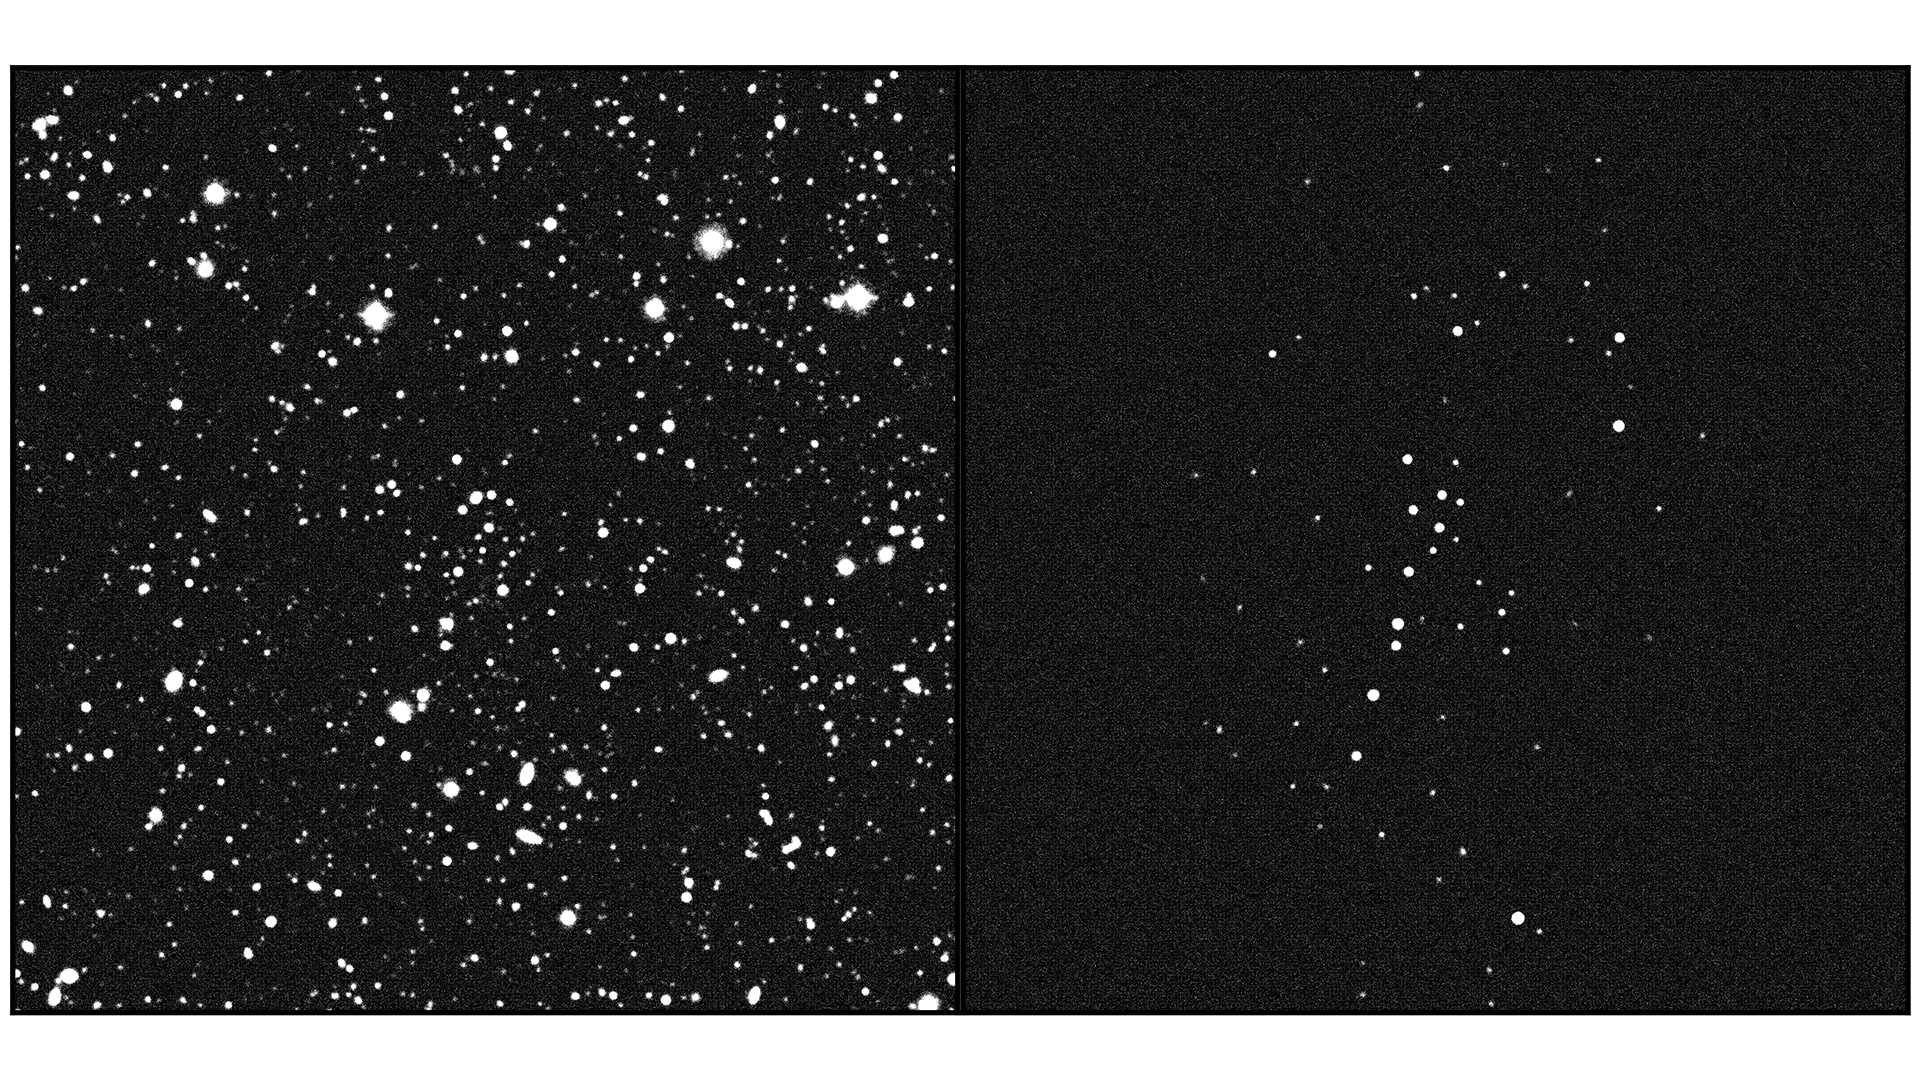 UMa3/U1 was found hidden in this deep-sky image captured by the Canada France Hawaii Telescope.